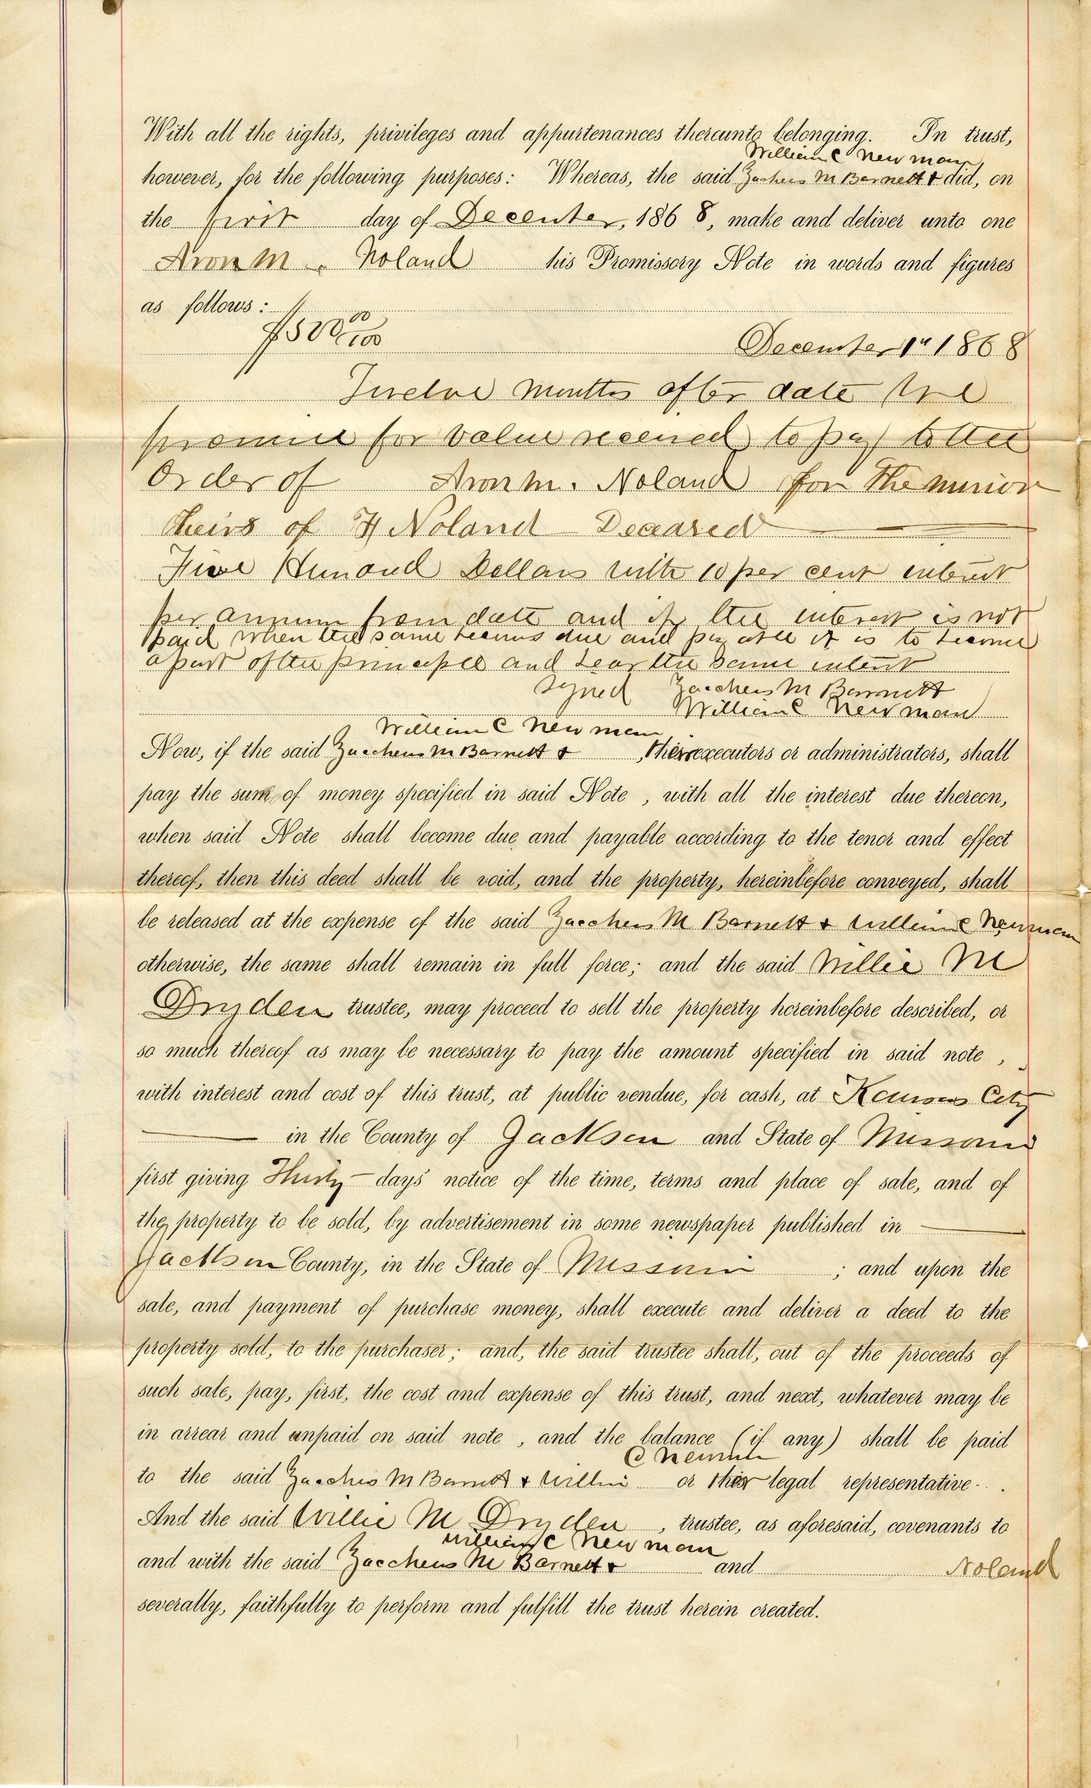 Deed of Trust from Jacchous M. Barnett and William C. Newman to William M. Dryden Jr.